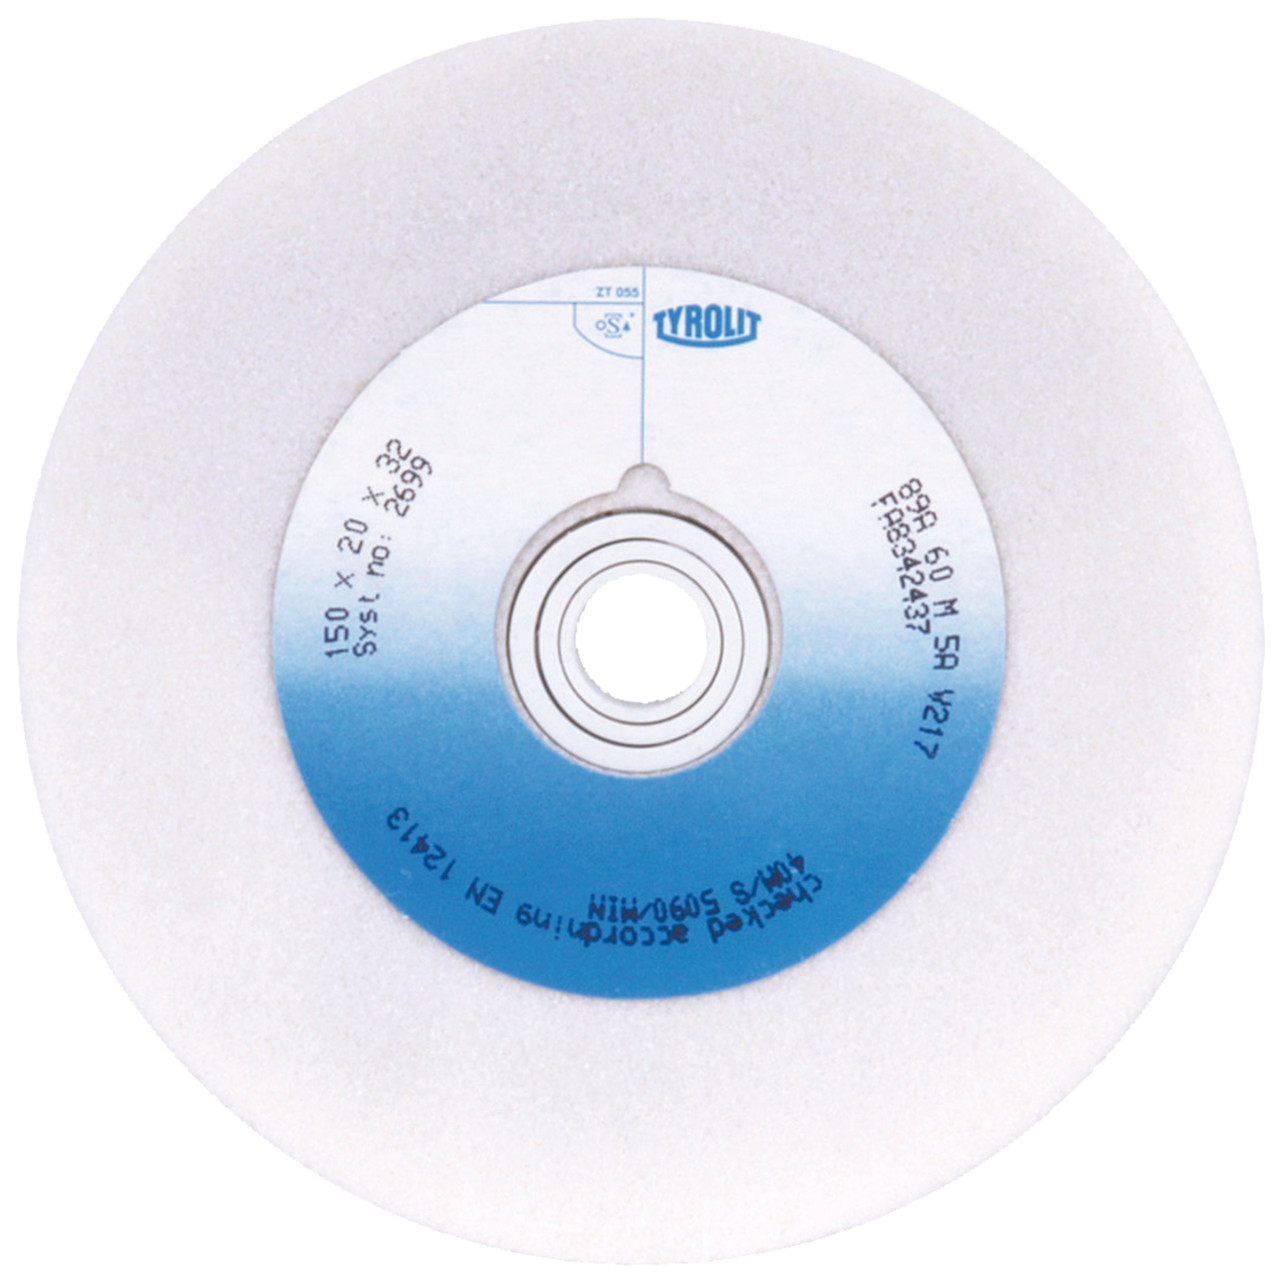 TYROLIT conventional ceramic grinding wheels DxDxH 175x25x51 For high-alloy steels and HSS, shape: 1, Art. 377415